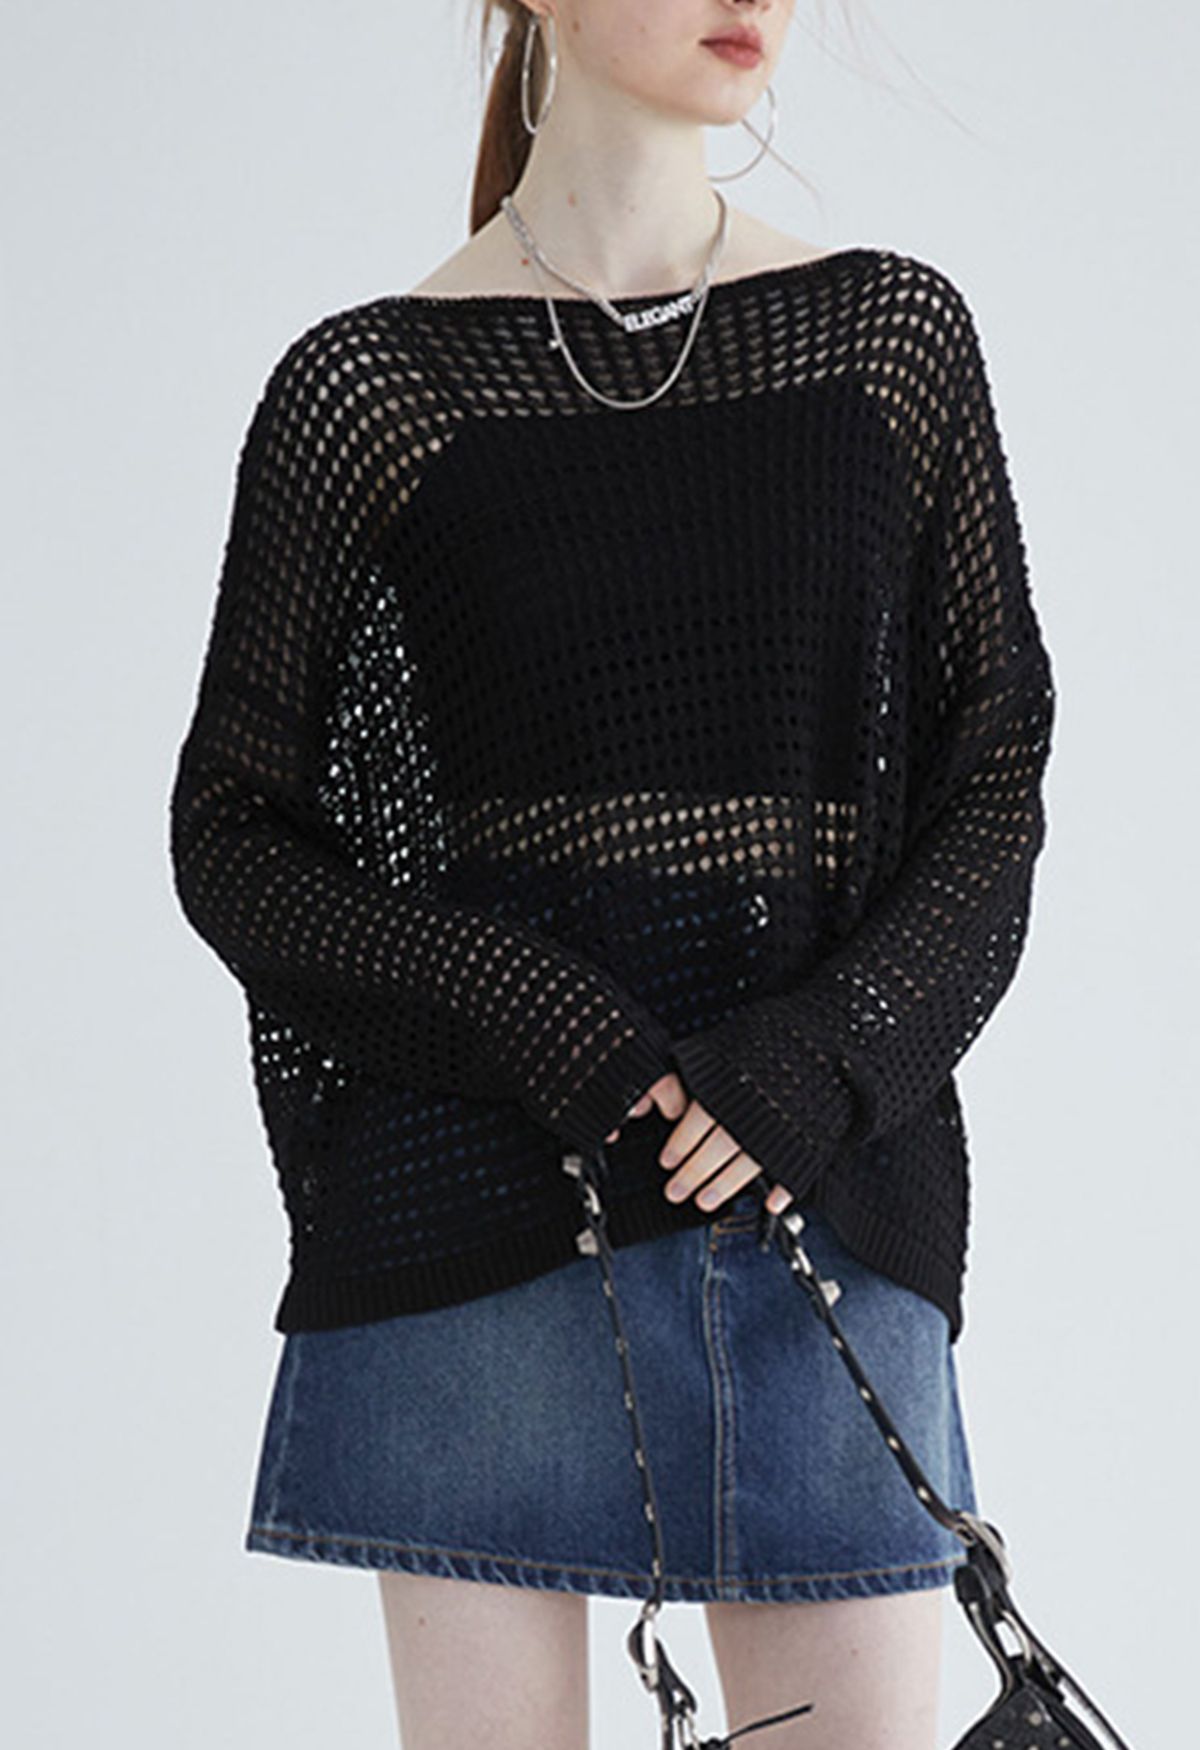 Hollow Out Boat Neck Smock Top in Black